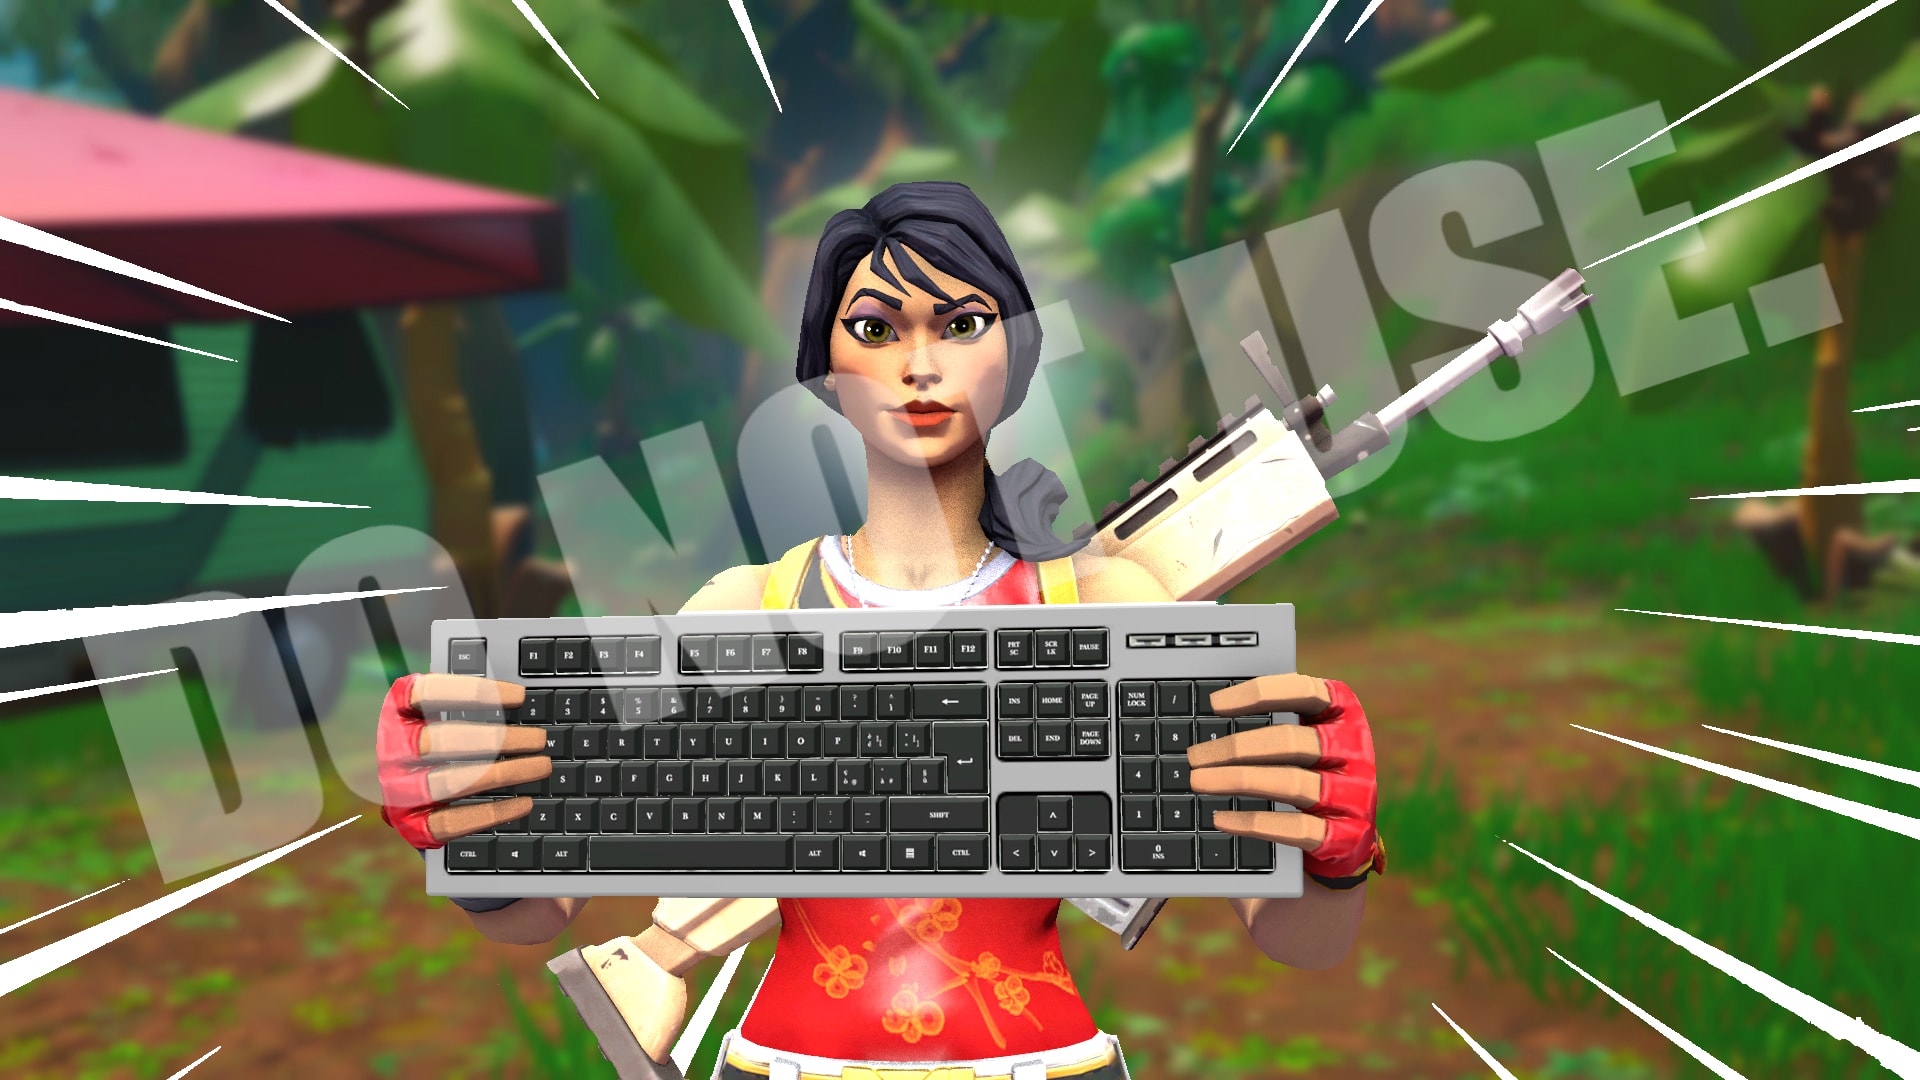 Fortnite Charecter Holding Sieng Make You A 3d Fortnite Thumbnail By Mattlewis123 Fiverr